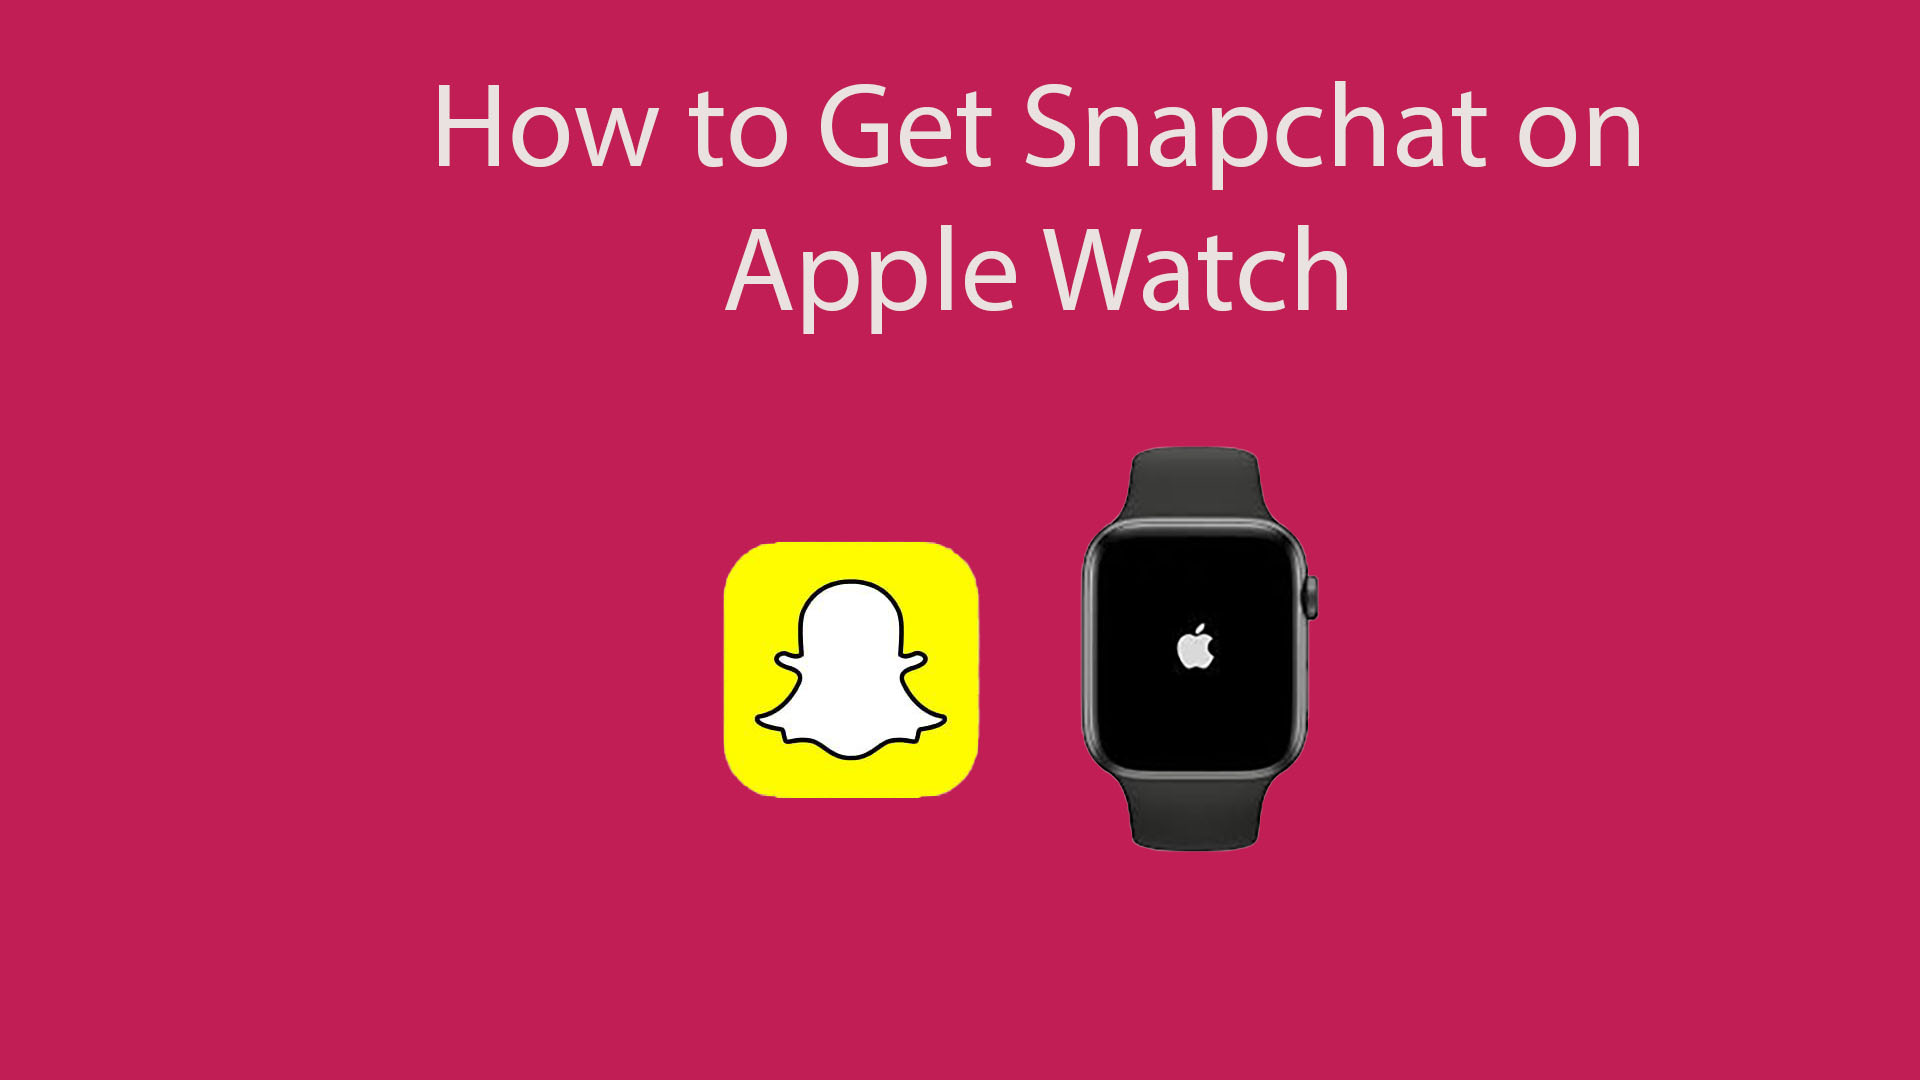 How to get snapchat on Apple Watch